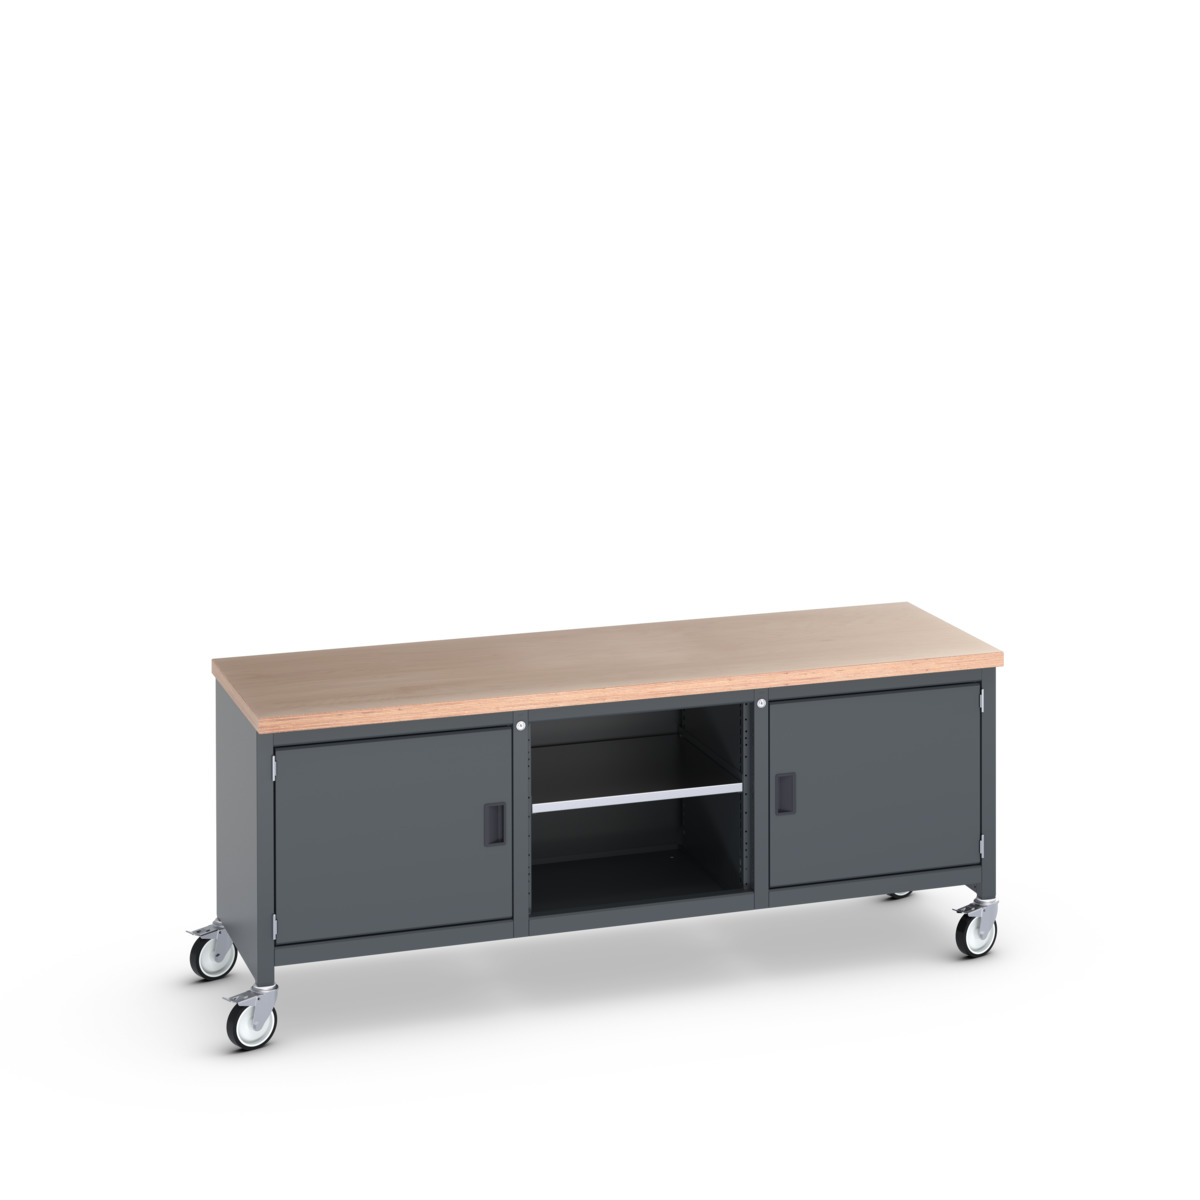 41002118.77V - cubio mobile storage bench (mpx)